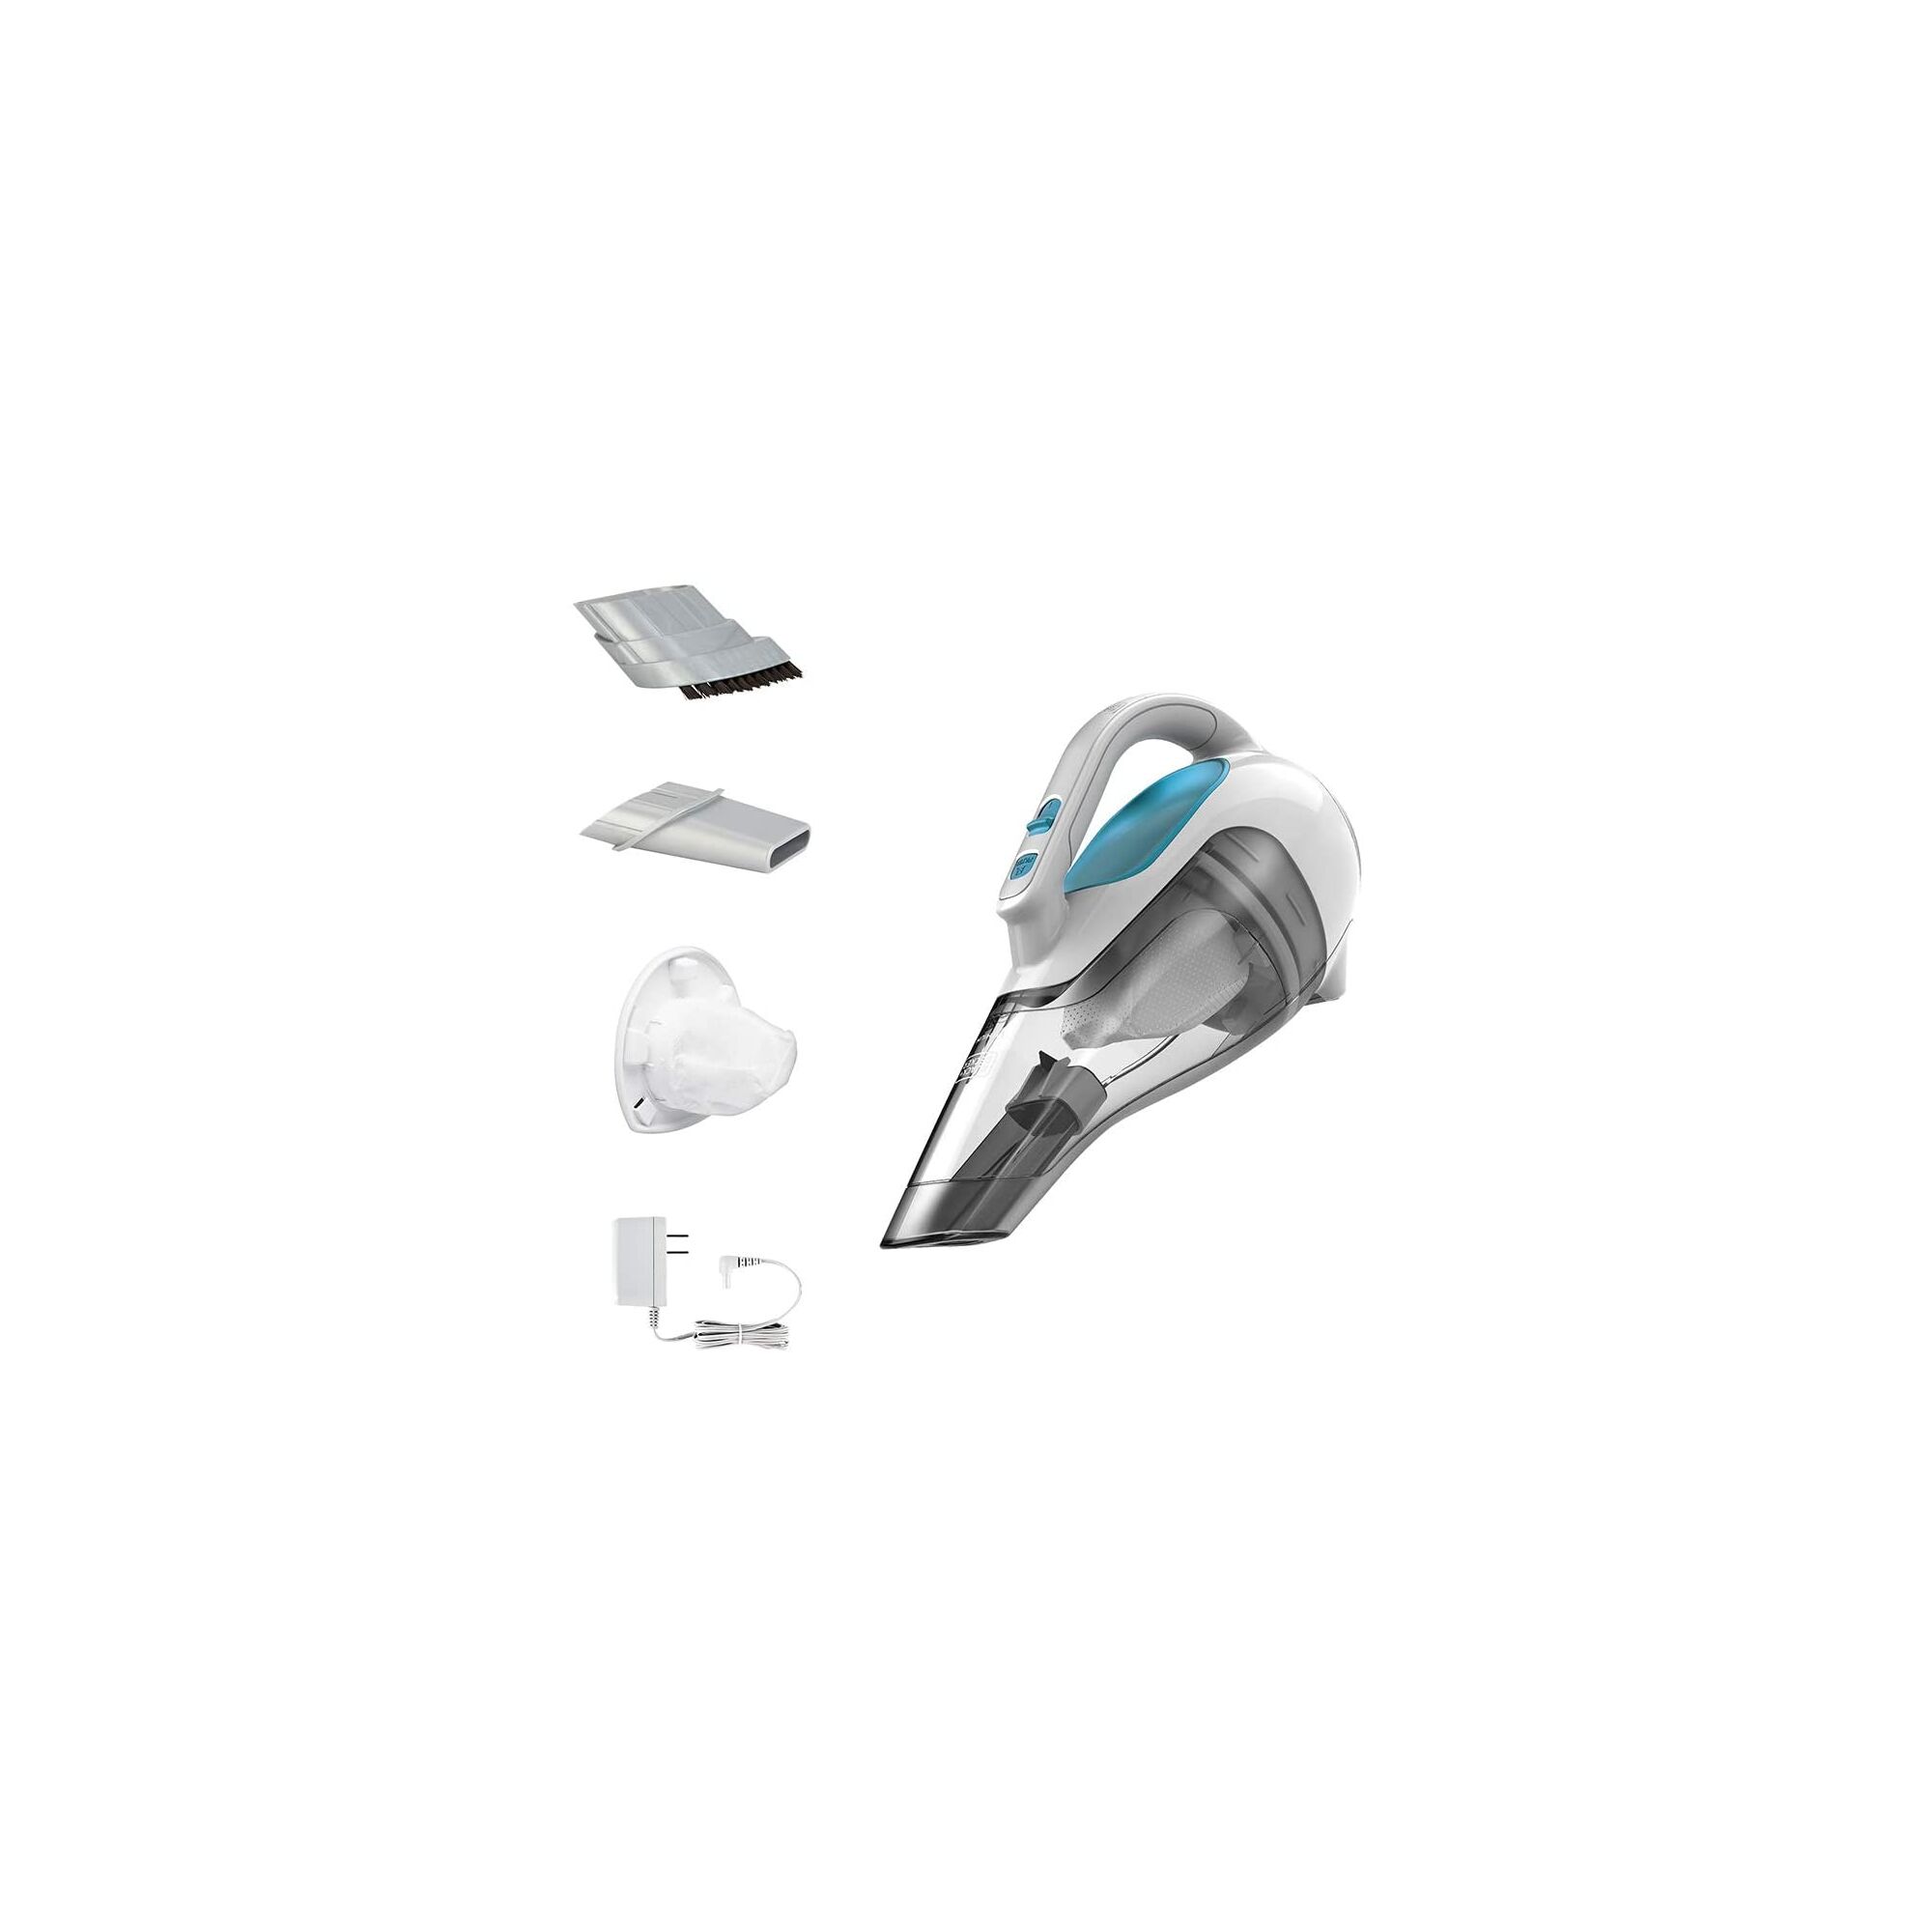 Accessories included with BLACK+DECKER dustbuster